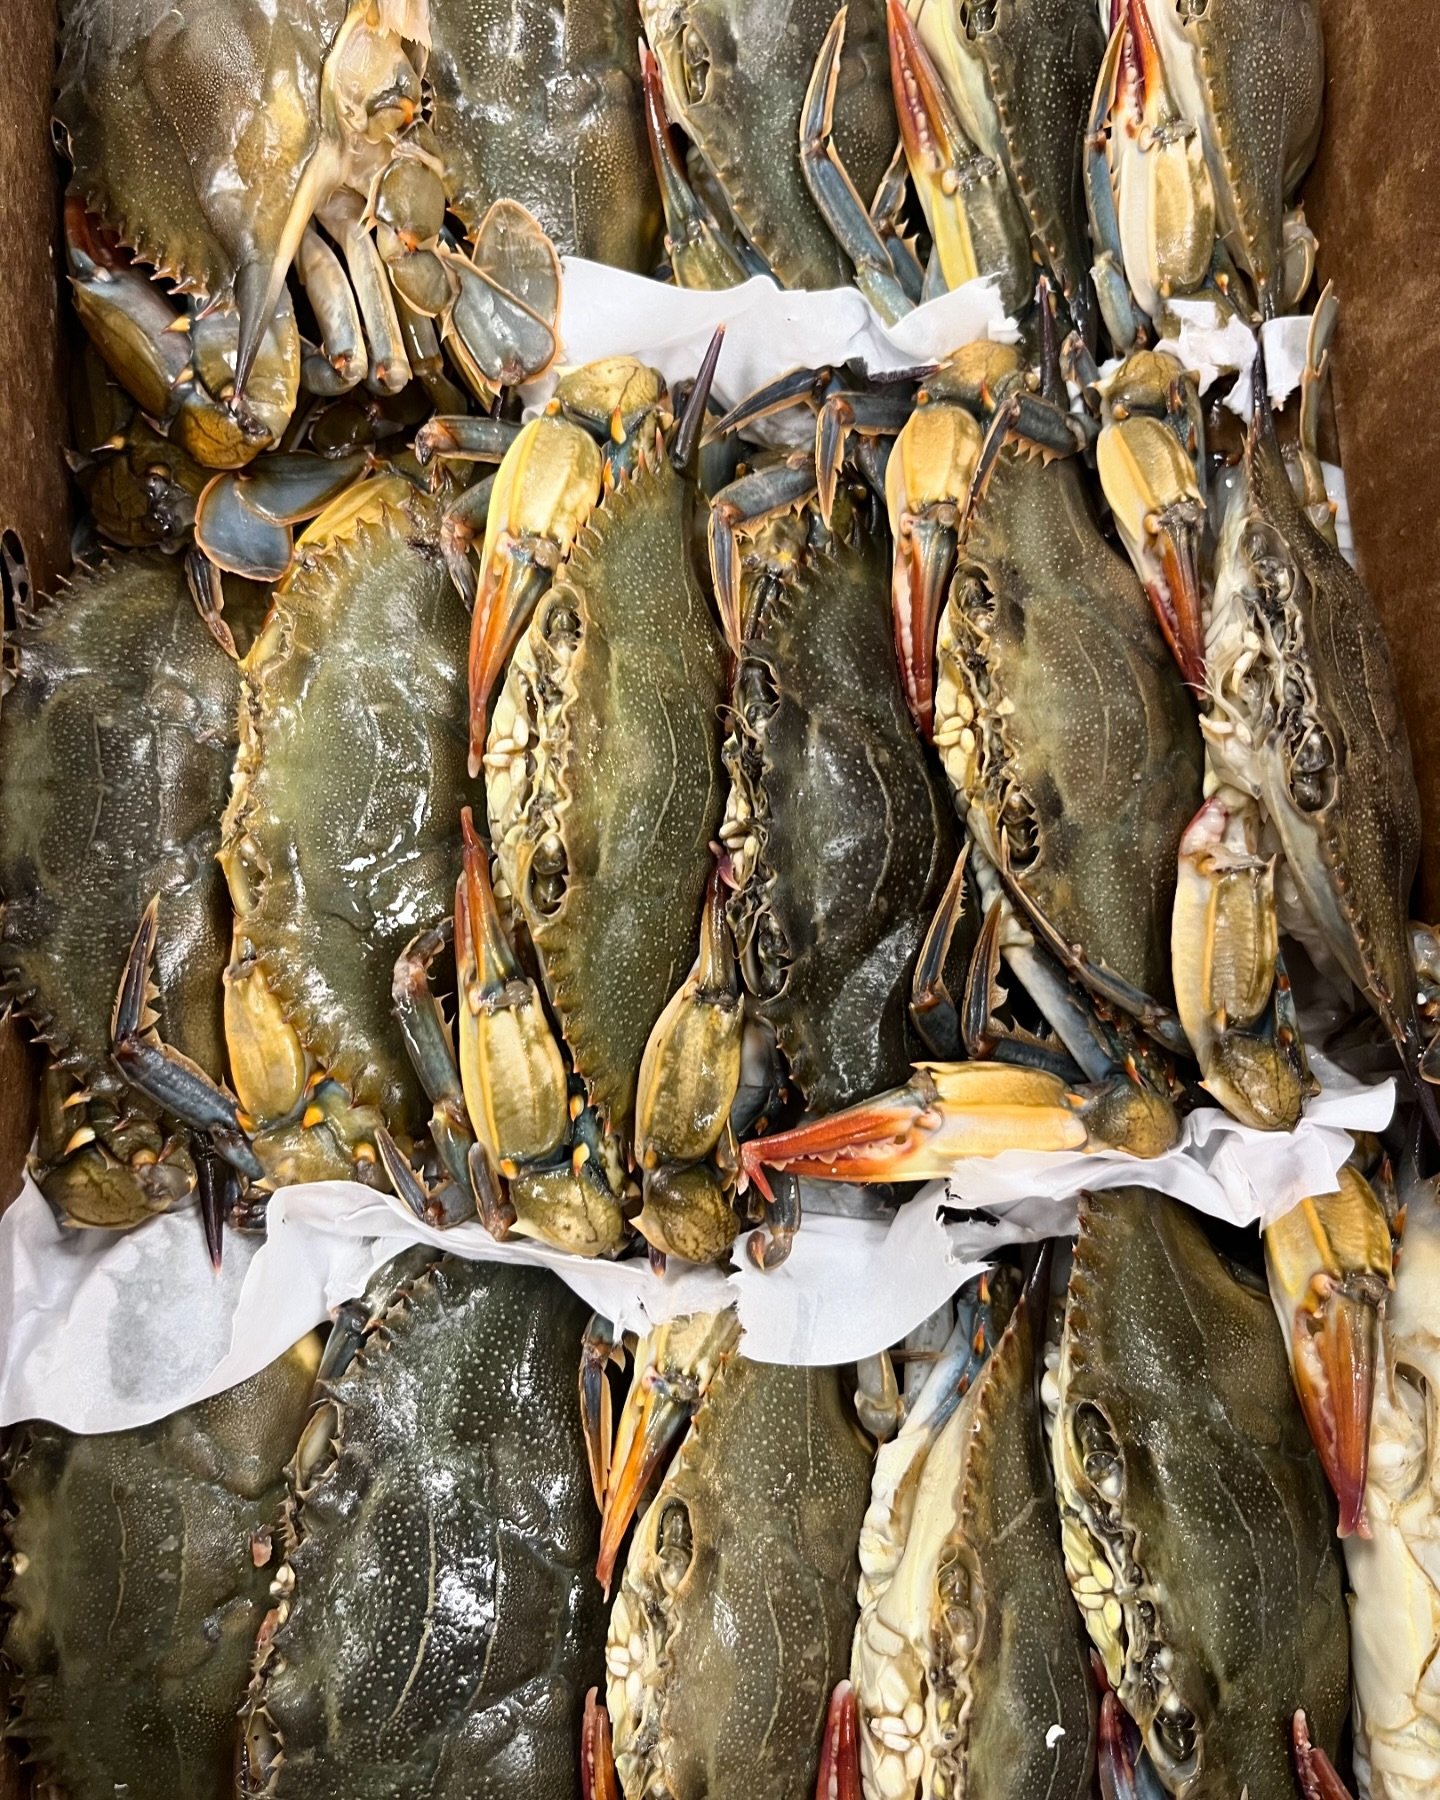 🦀 Fresh Soft Shell Crabs hit the seafood case this afternoon, just in time for the weekend. Come get 'em while they last 🦀